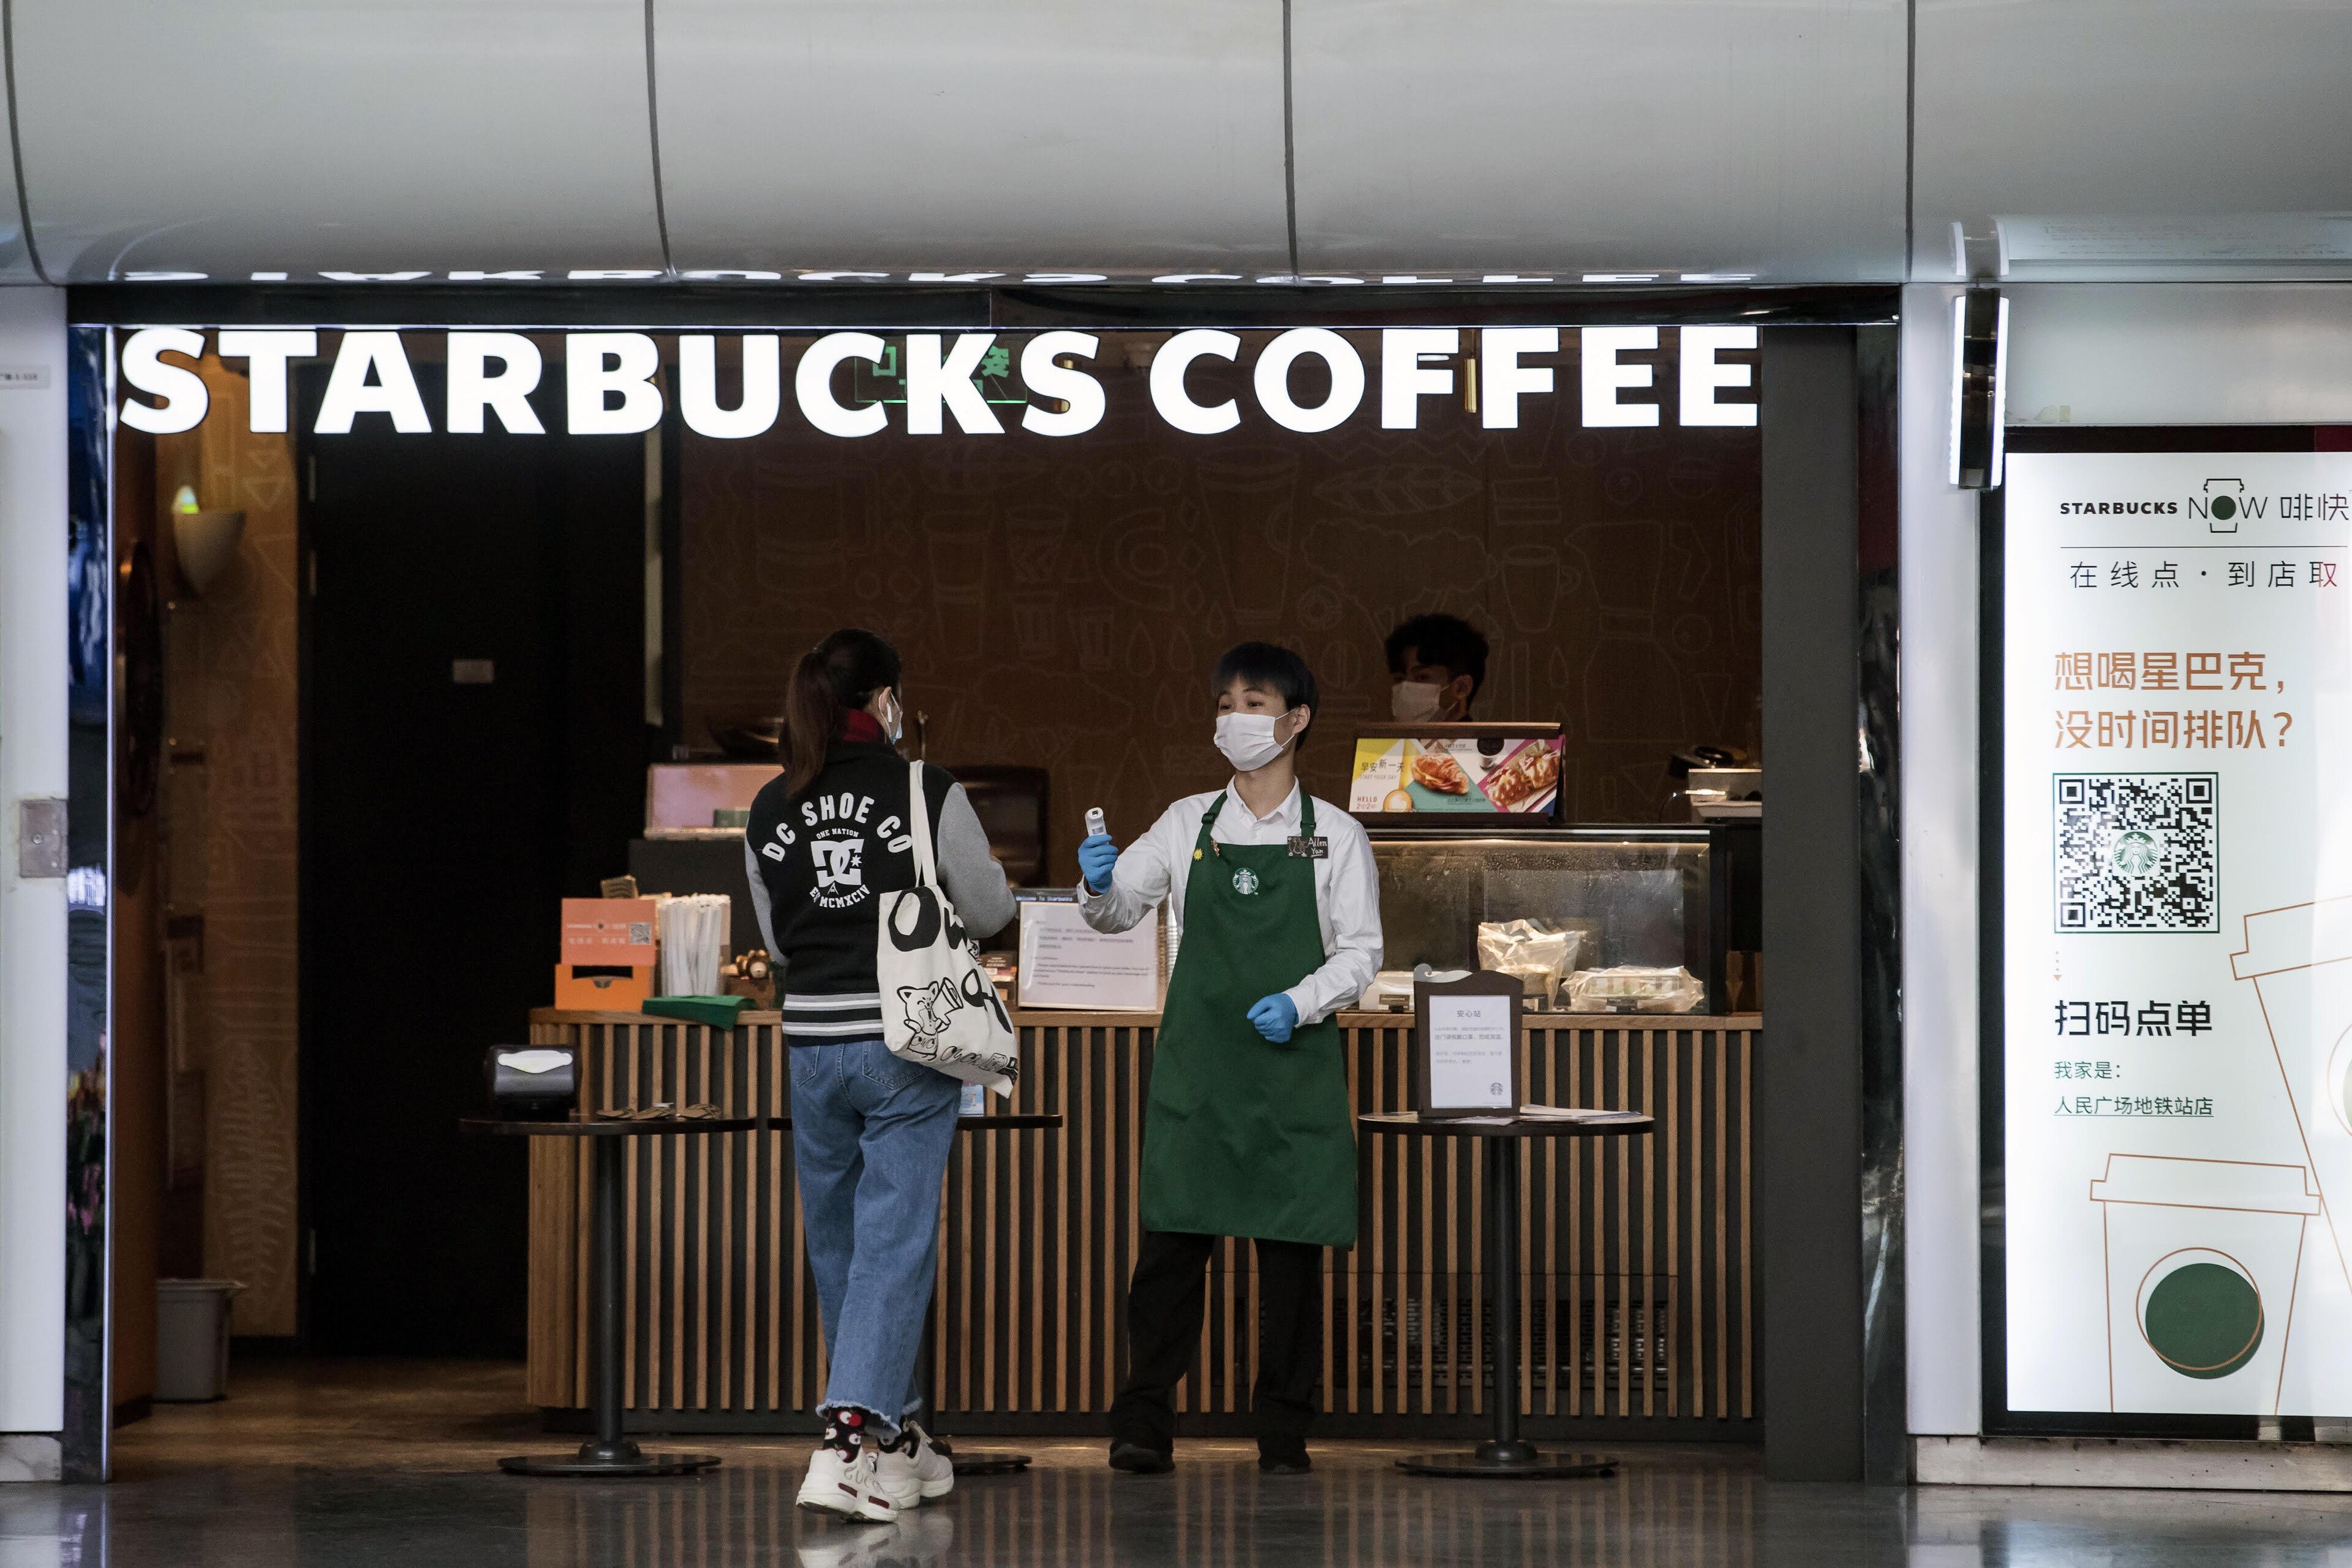 Can Starbucks’ share price recover after coronavirus hits China business?